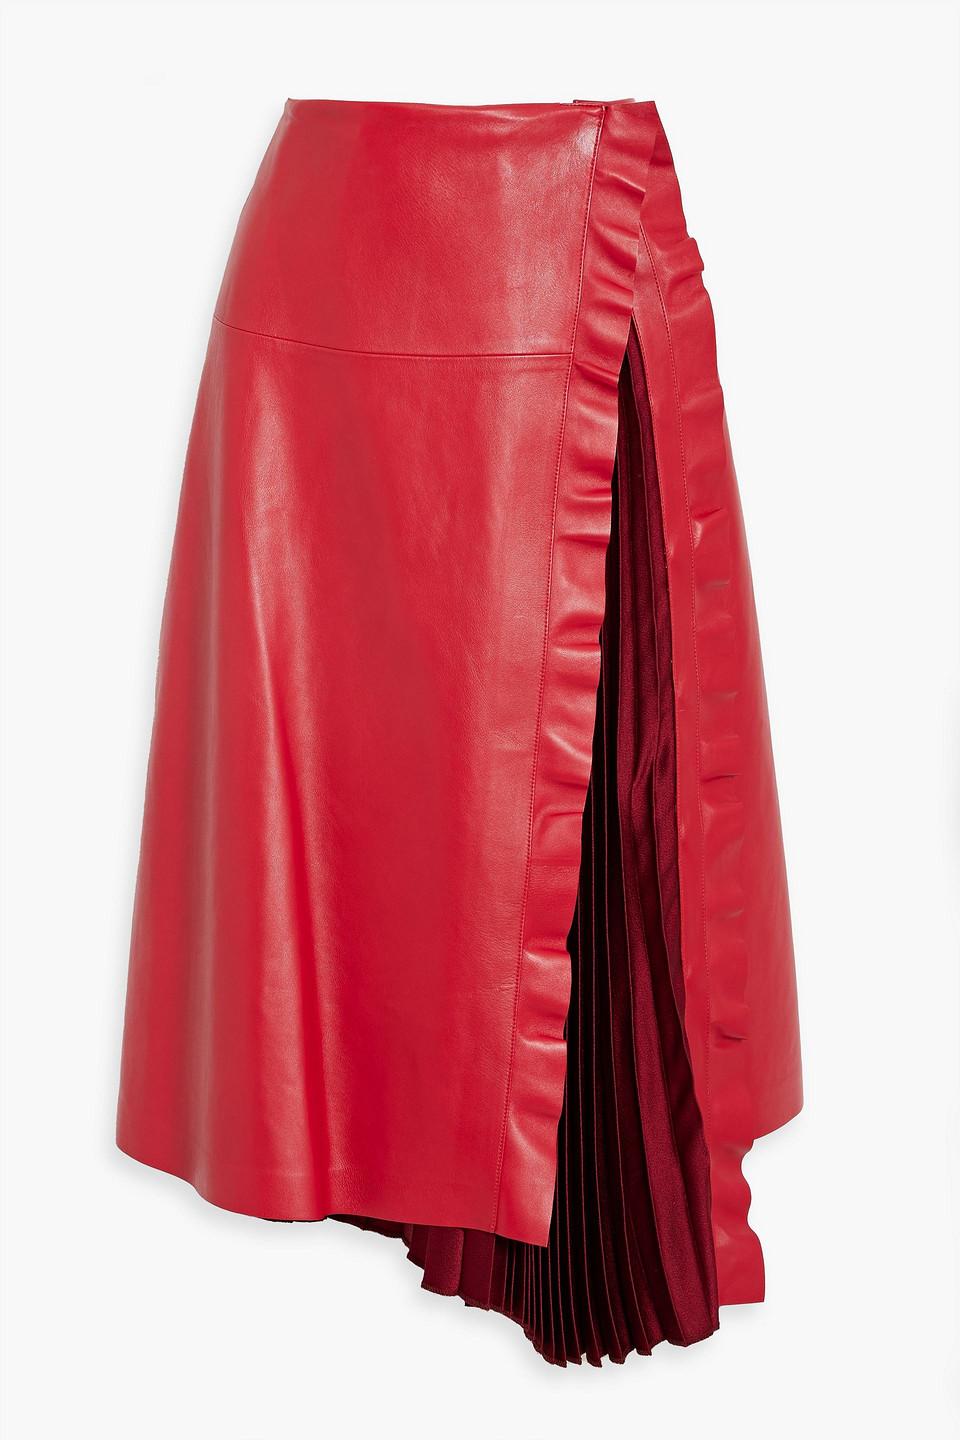 Valentino Crepe-paneled Leather Skirt in Lyst